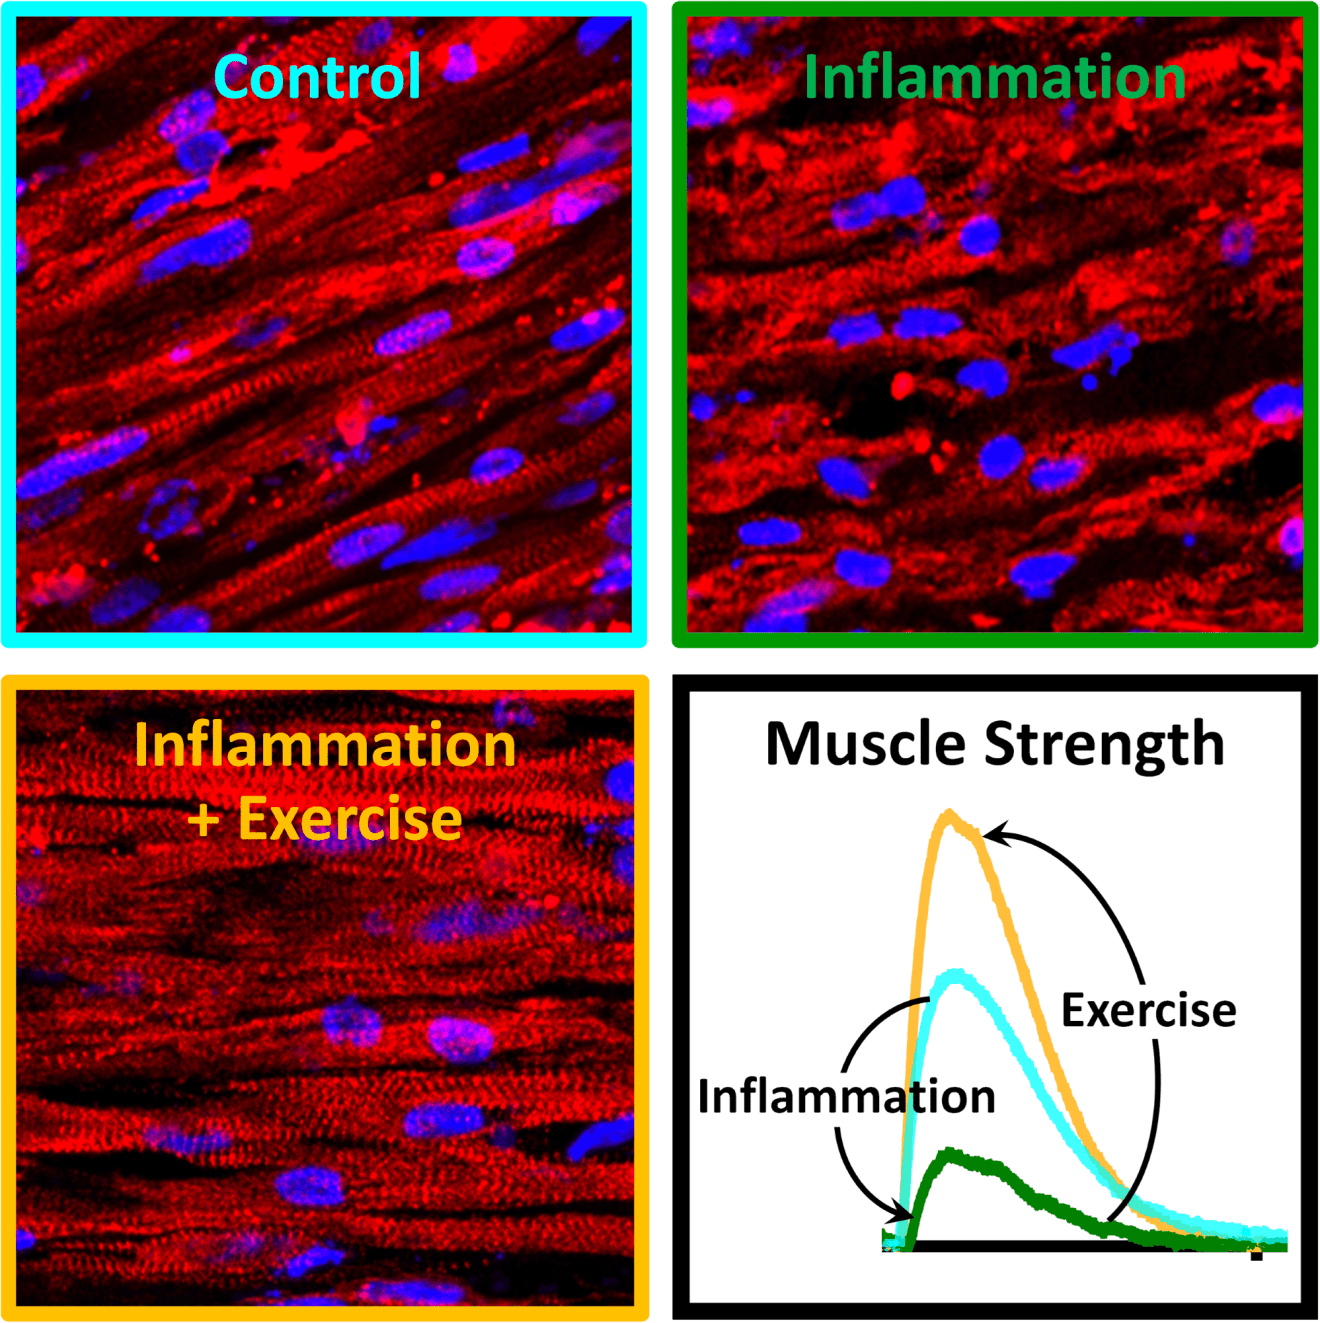 Chronic inflammation can be affected by muscle exercise